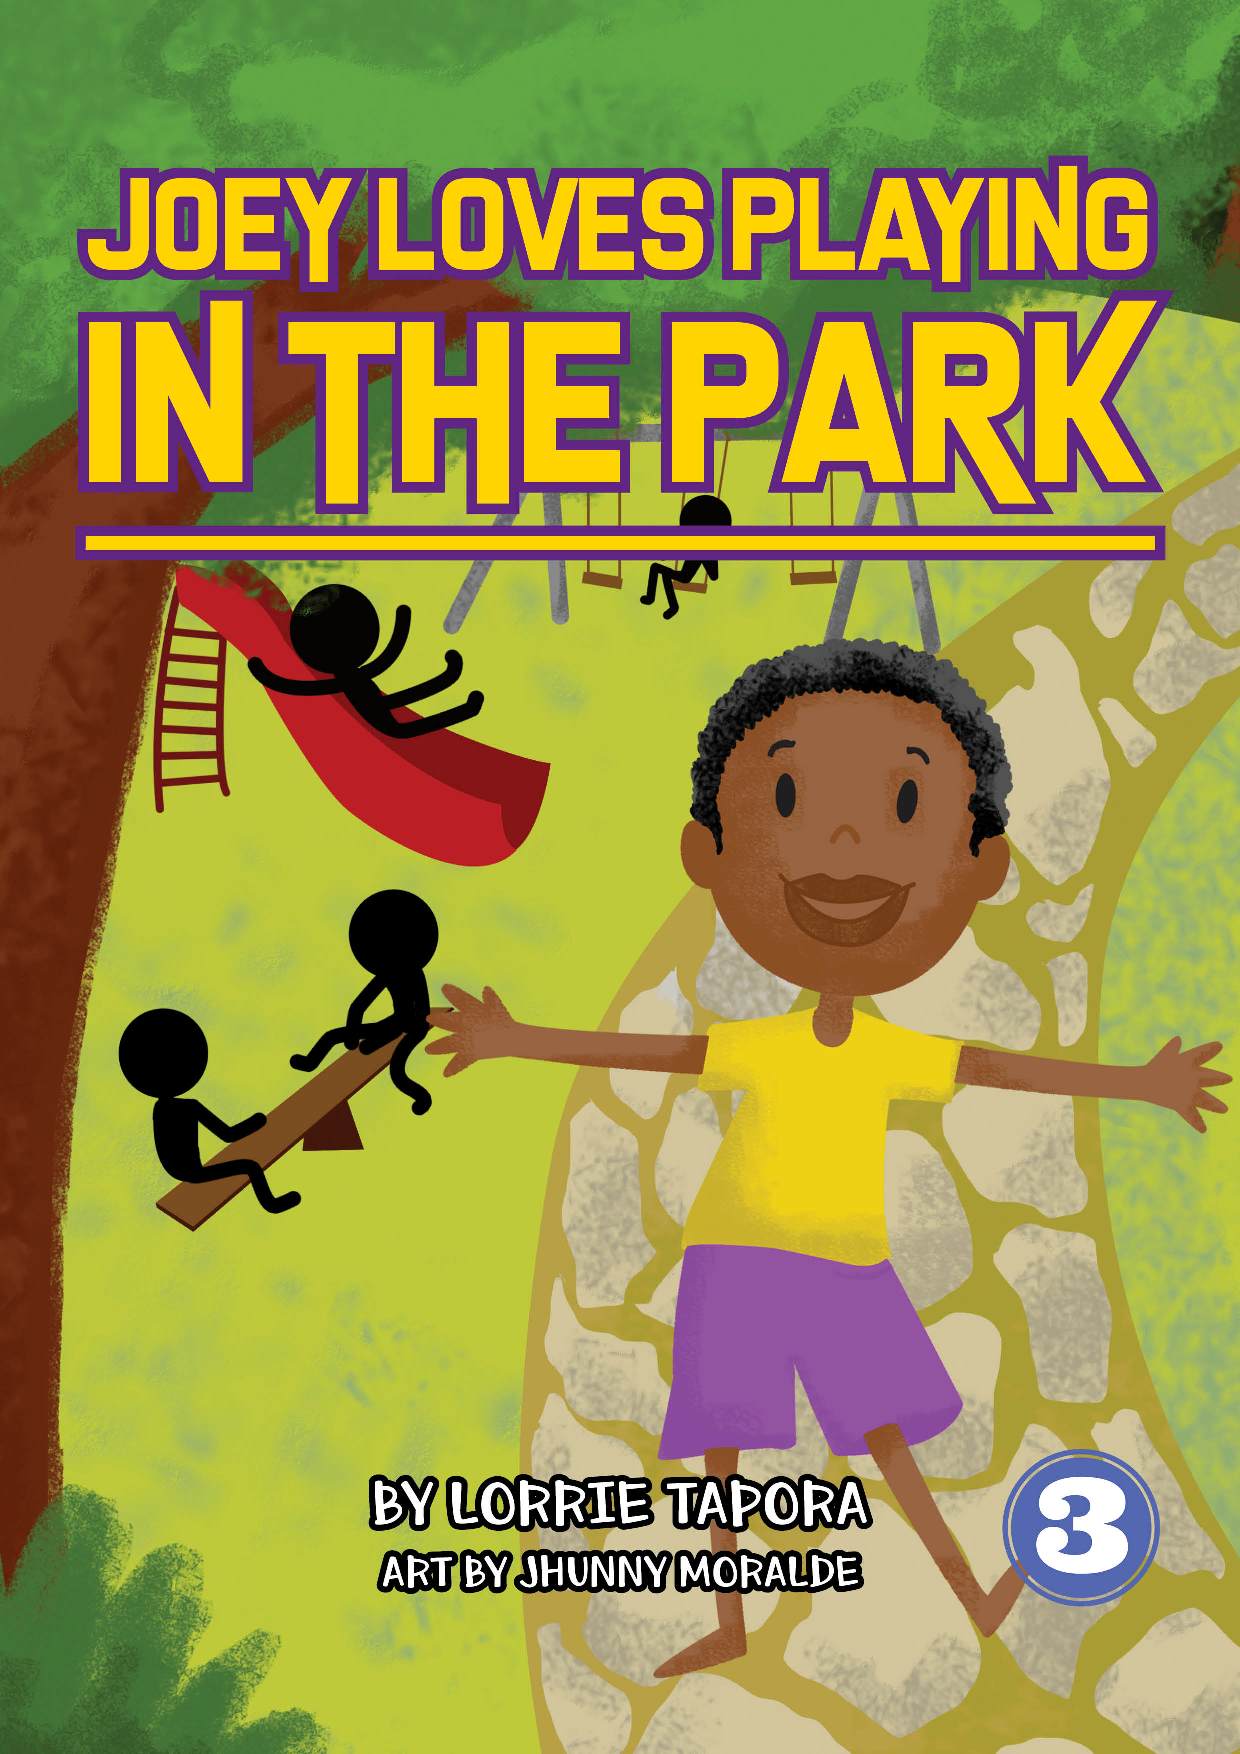 A book title page: Joey loves playing in the park by Lorrie Tapora. Art by Jhunny Moralde. 3. A drawing of a boy smiling and standing in the park. In the background are silhouettes of children on the seesaw, a child on a slide, and a child on a swing.